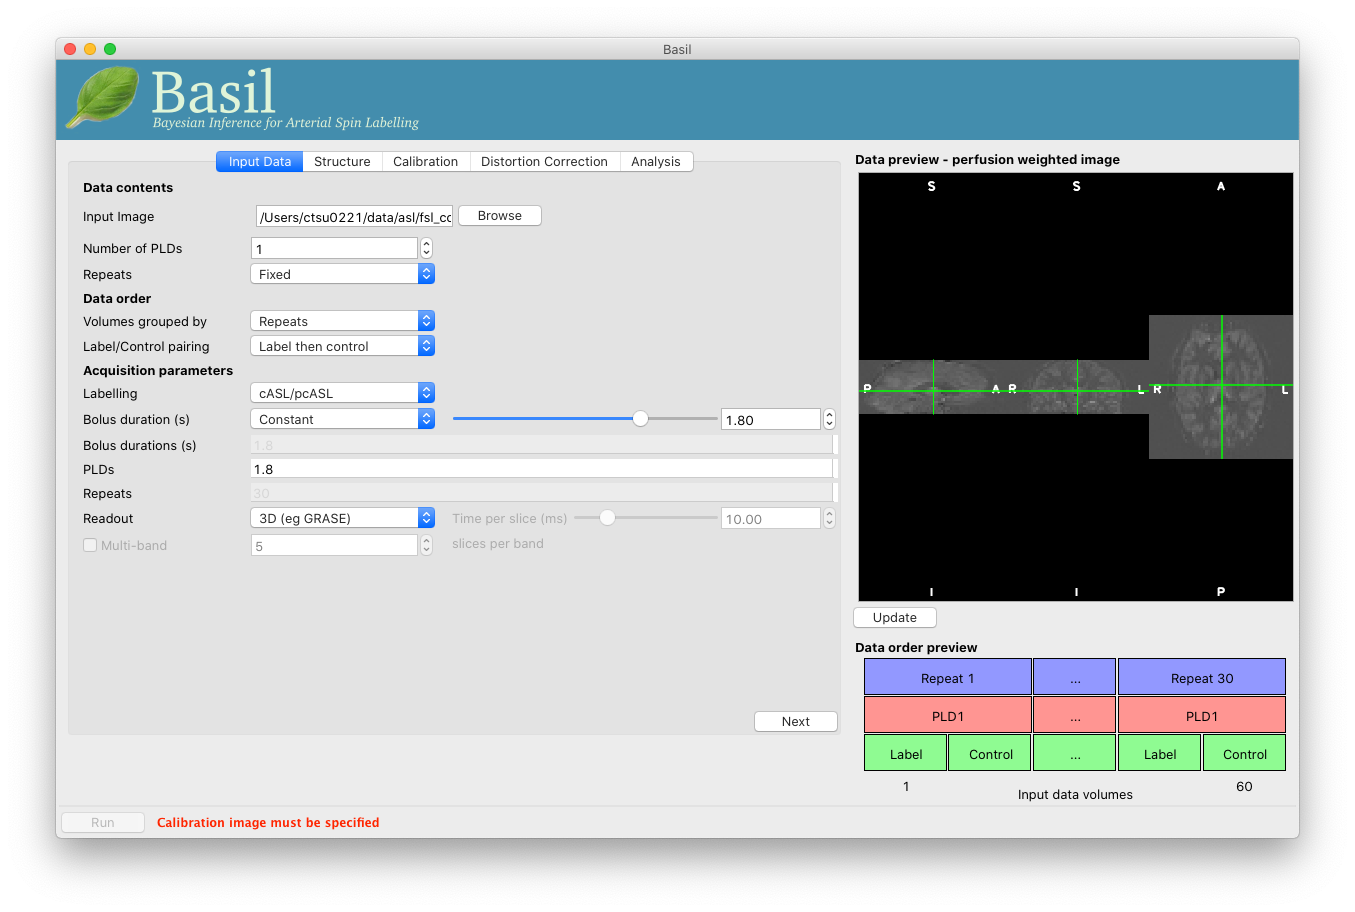 BASIL GUI previewing perfusion-weighted image